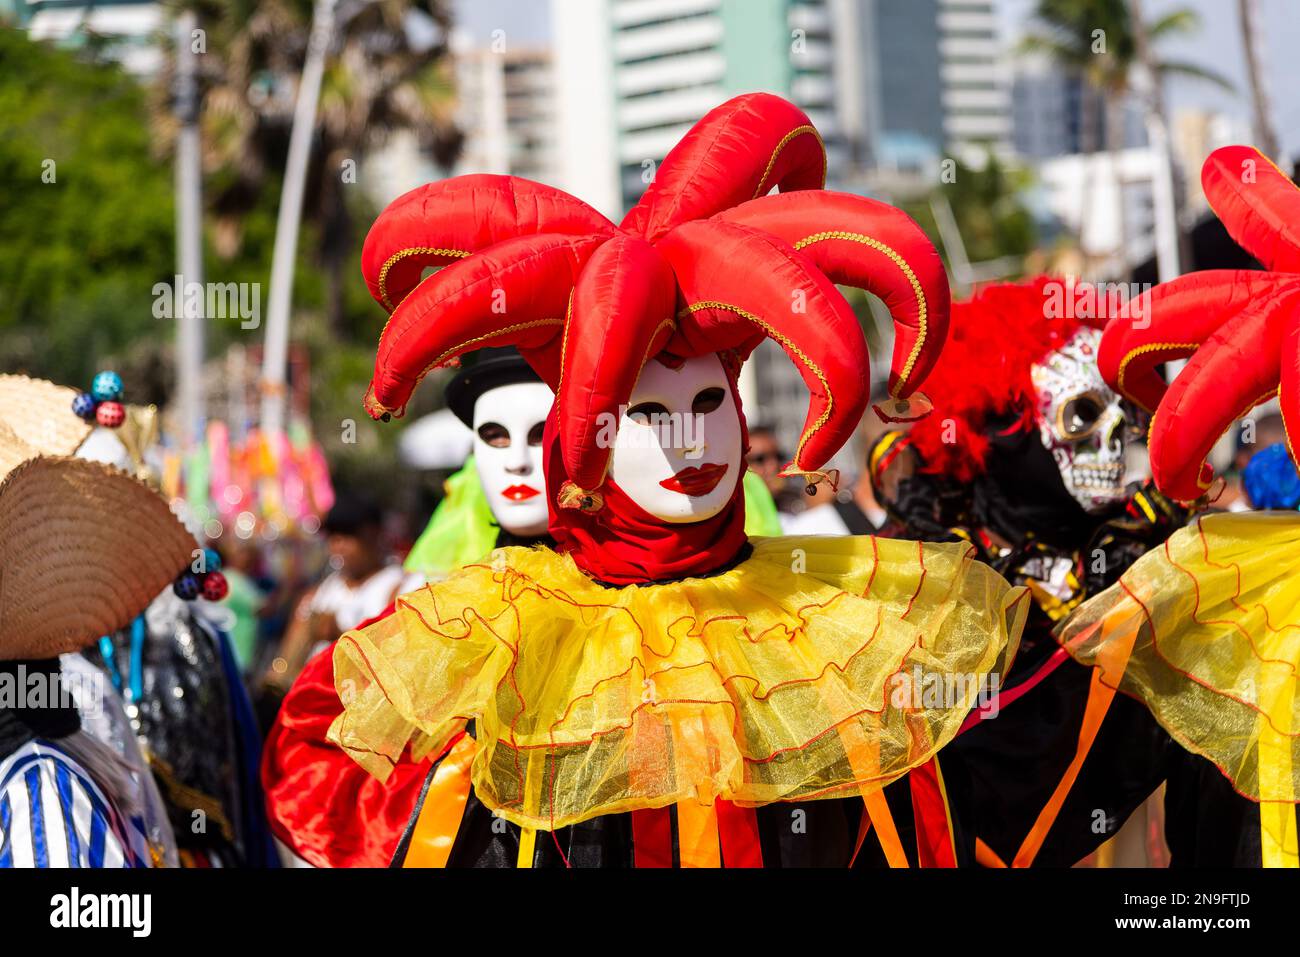 Salvador, Bahia, Brazil - February 11, 2023: Costumed people are seen  performing during the pre-Carnival Fuzue parade in the city of Salvador, Bahia  Stock Photo - Alamy